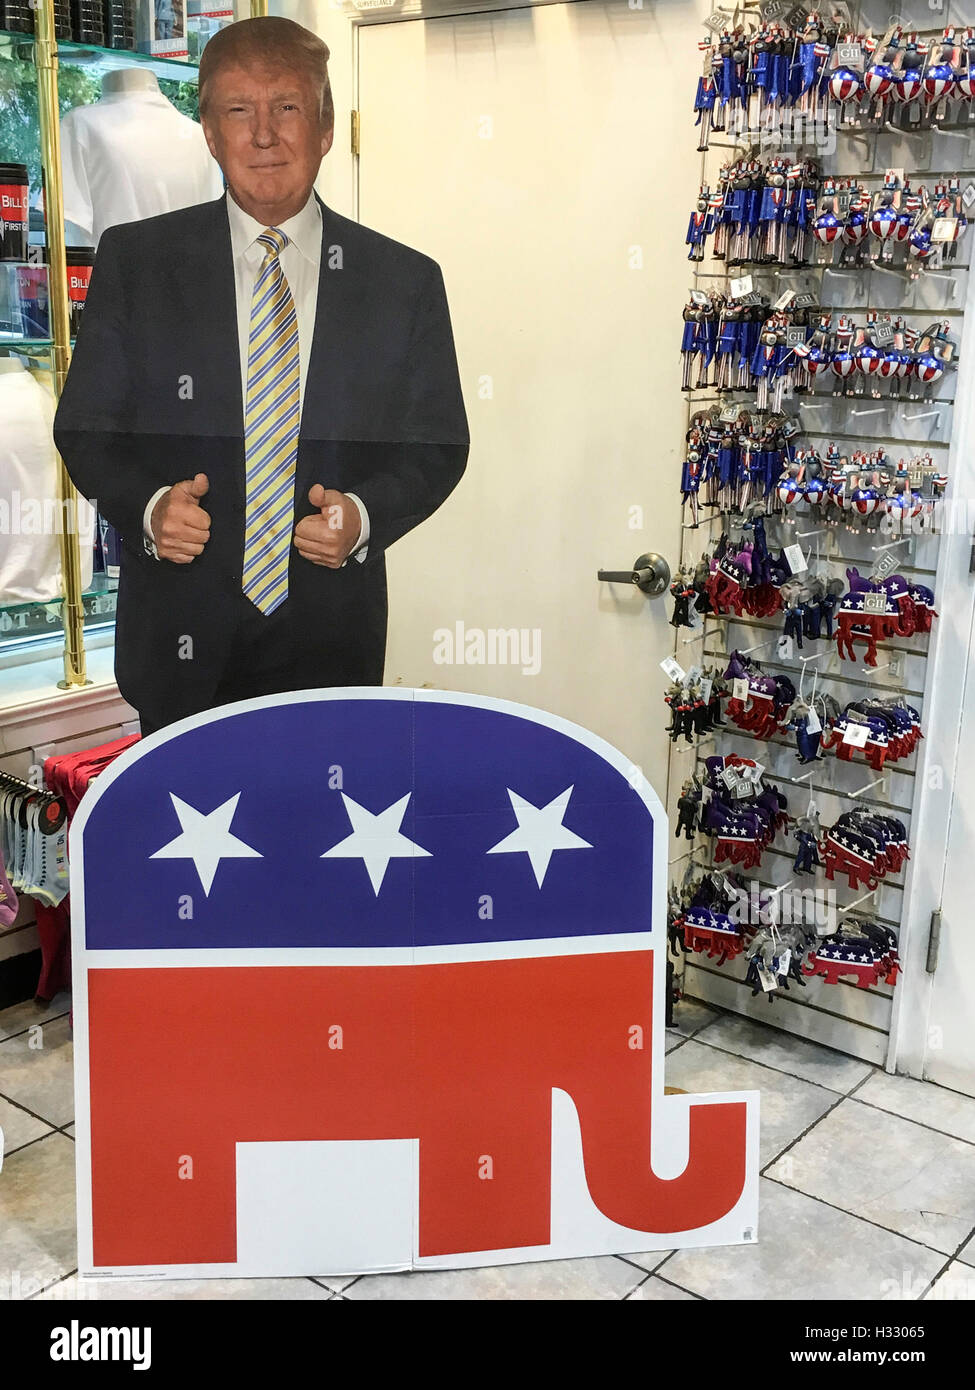 Effigy of Donald Trump on different items during the american presidential campaign, USA Stock Photo